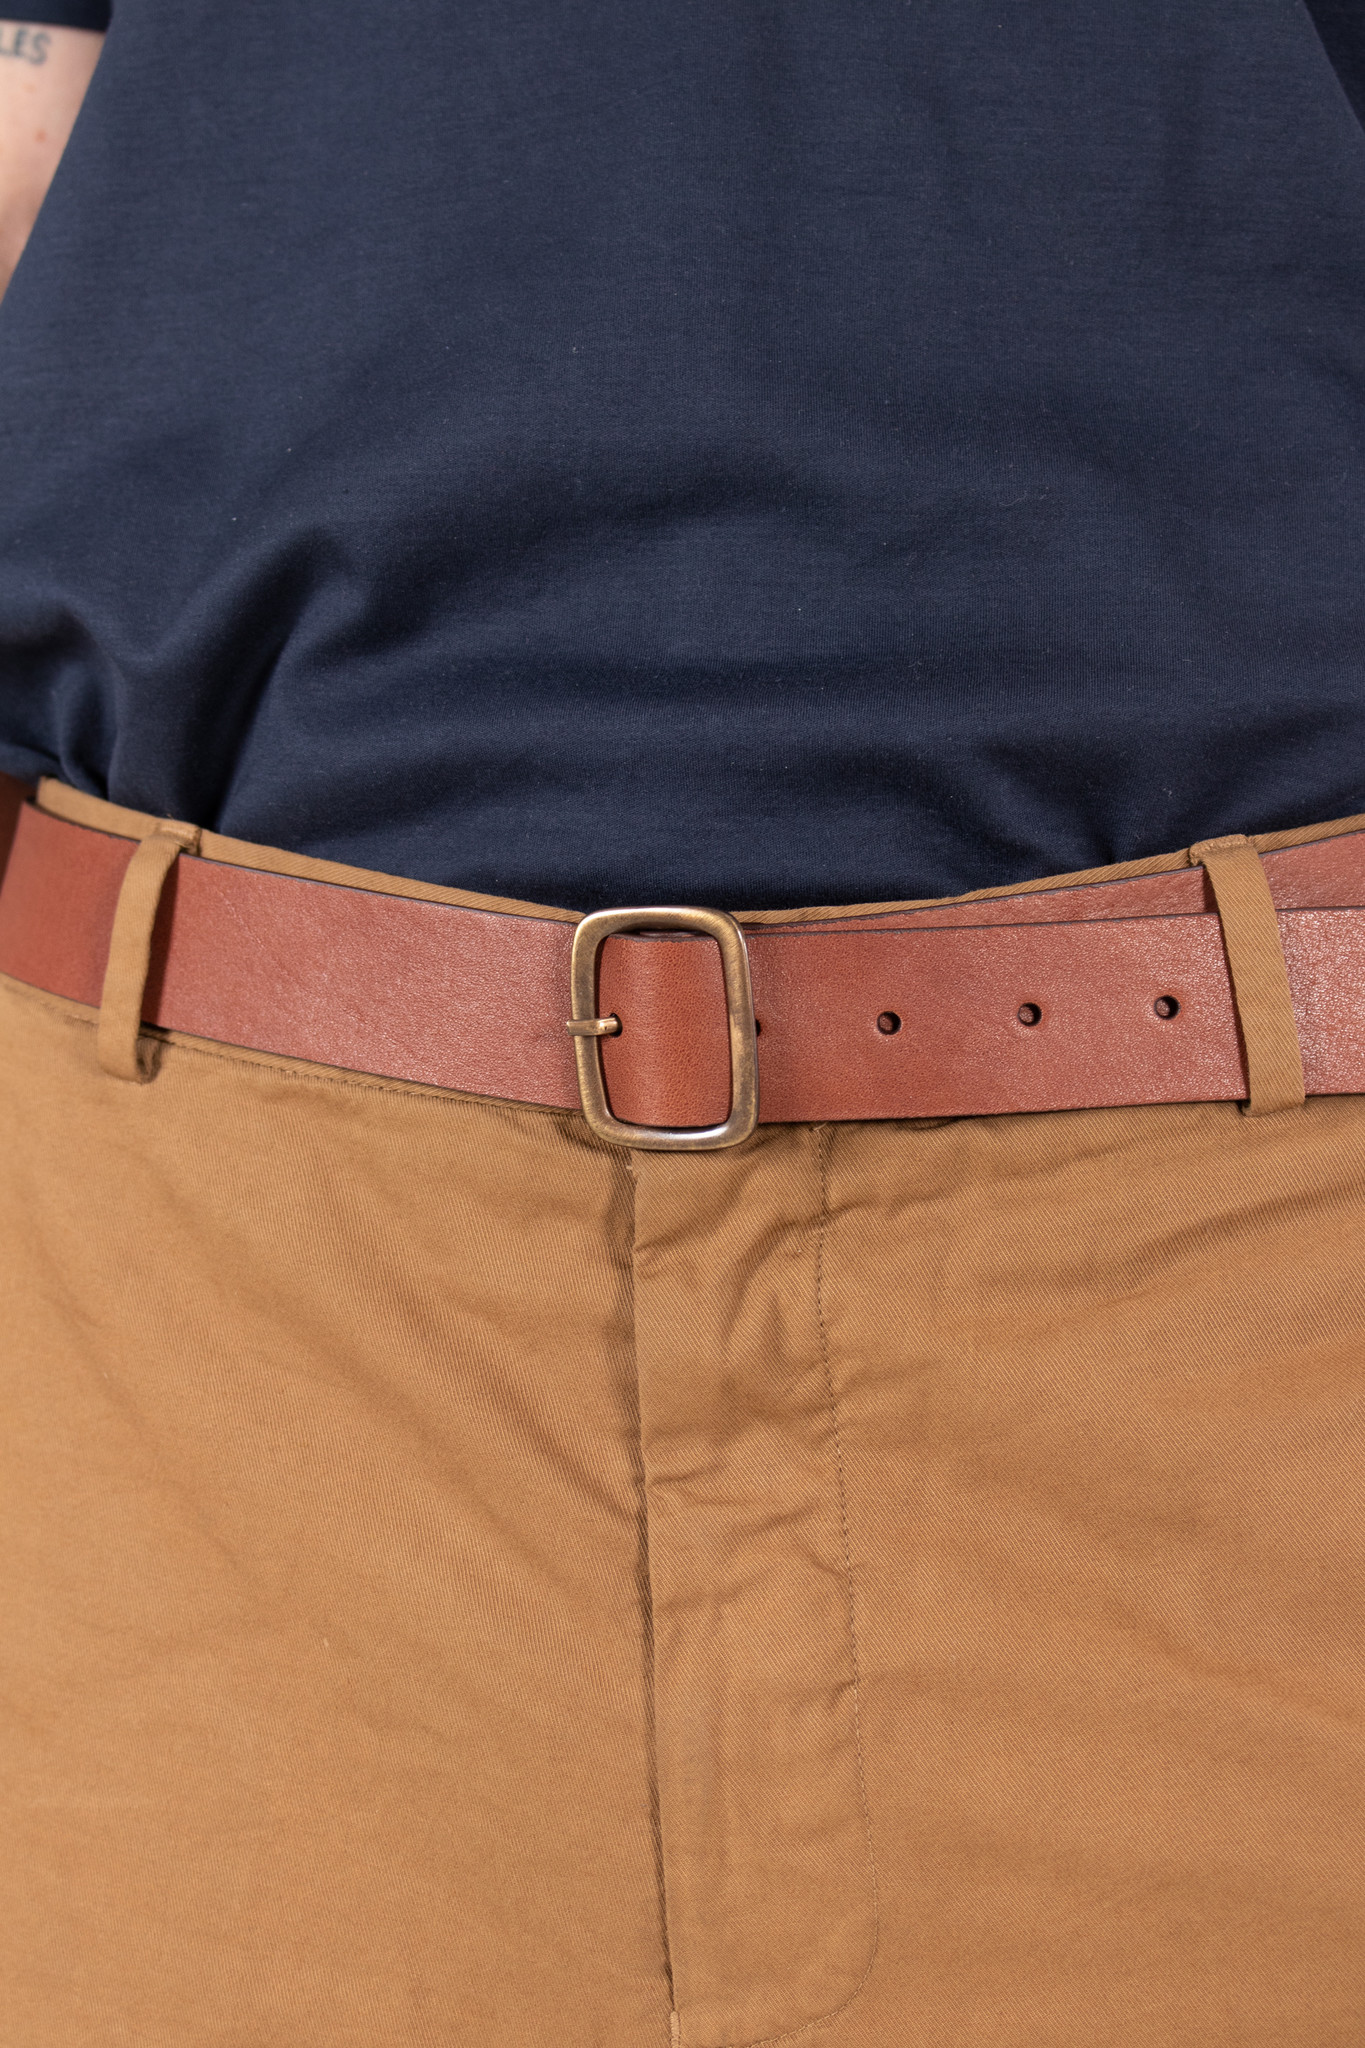 Anderson's Belt / A3412FD / Brown - c r i s